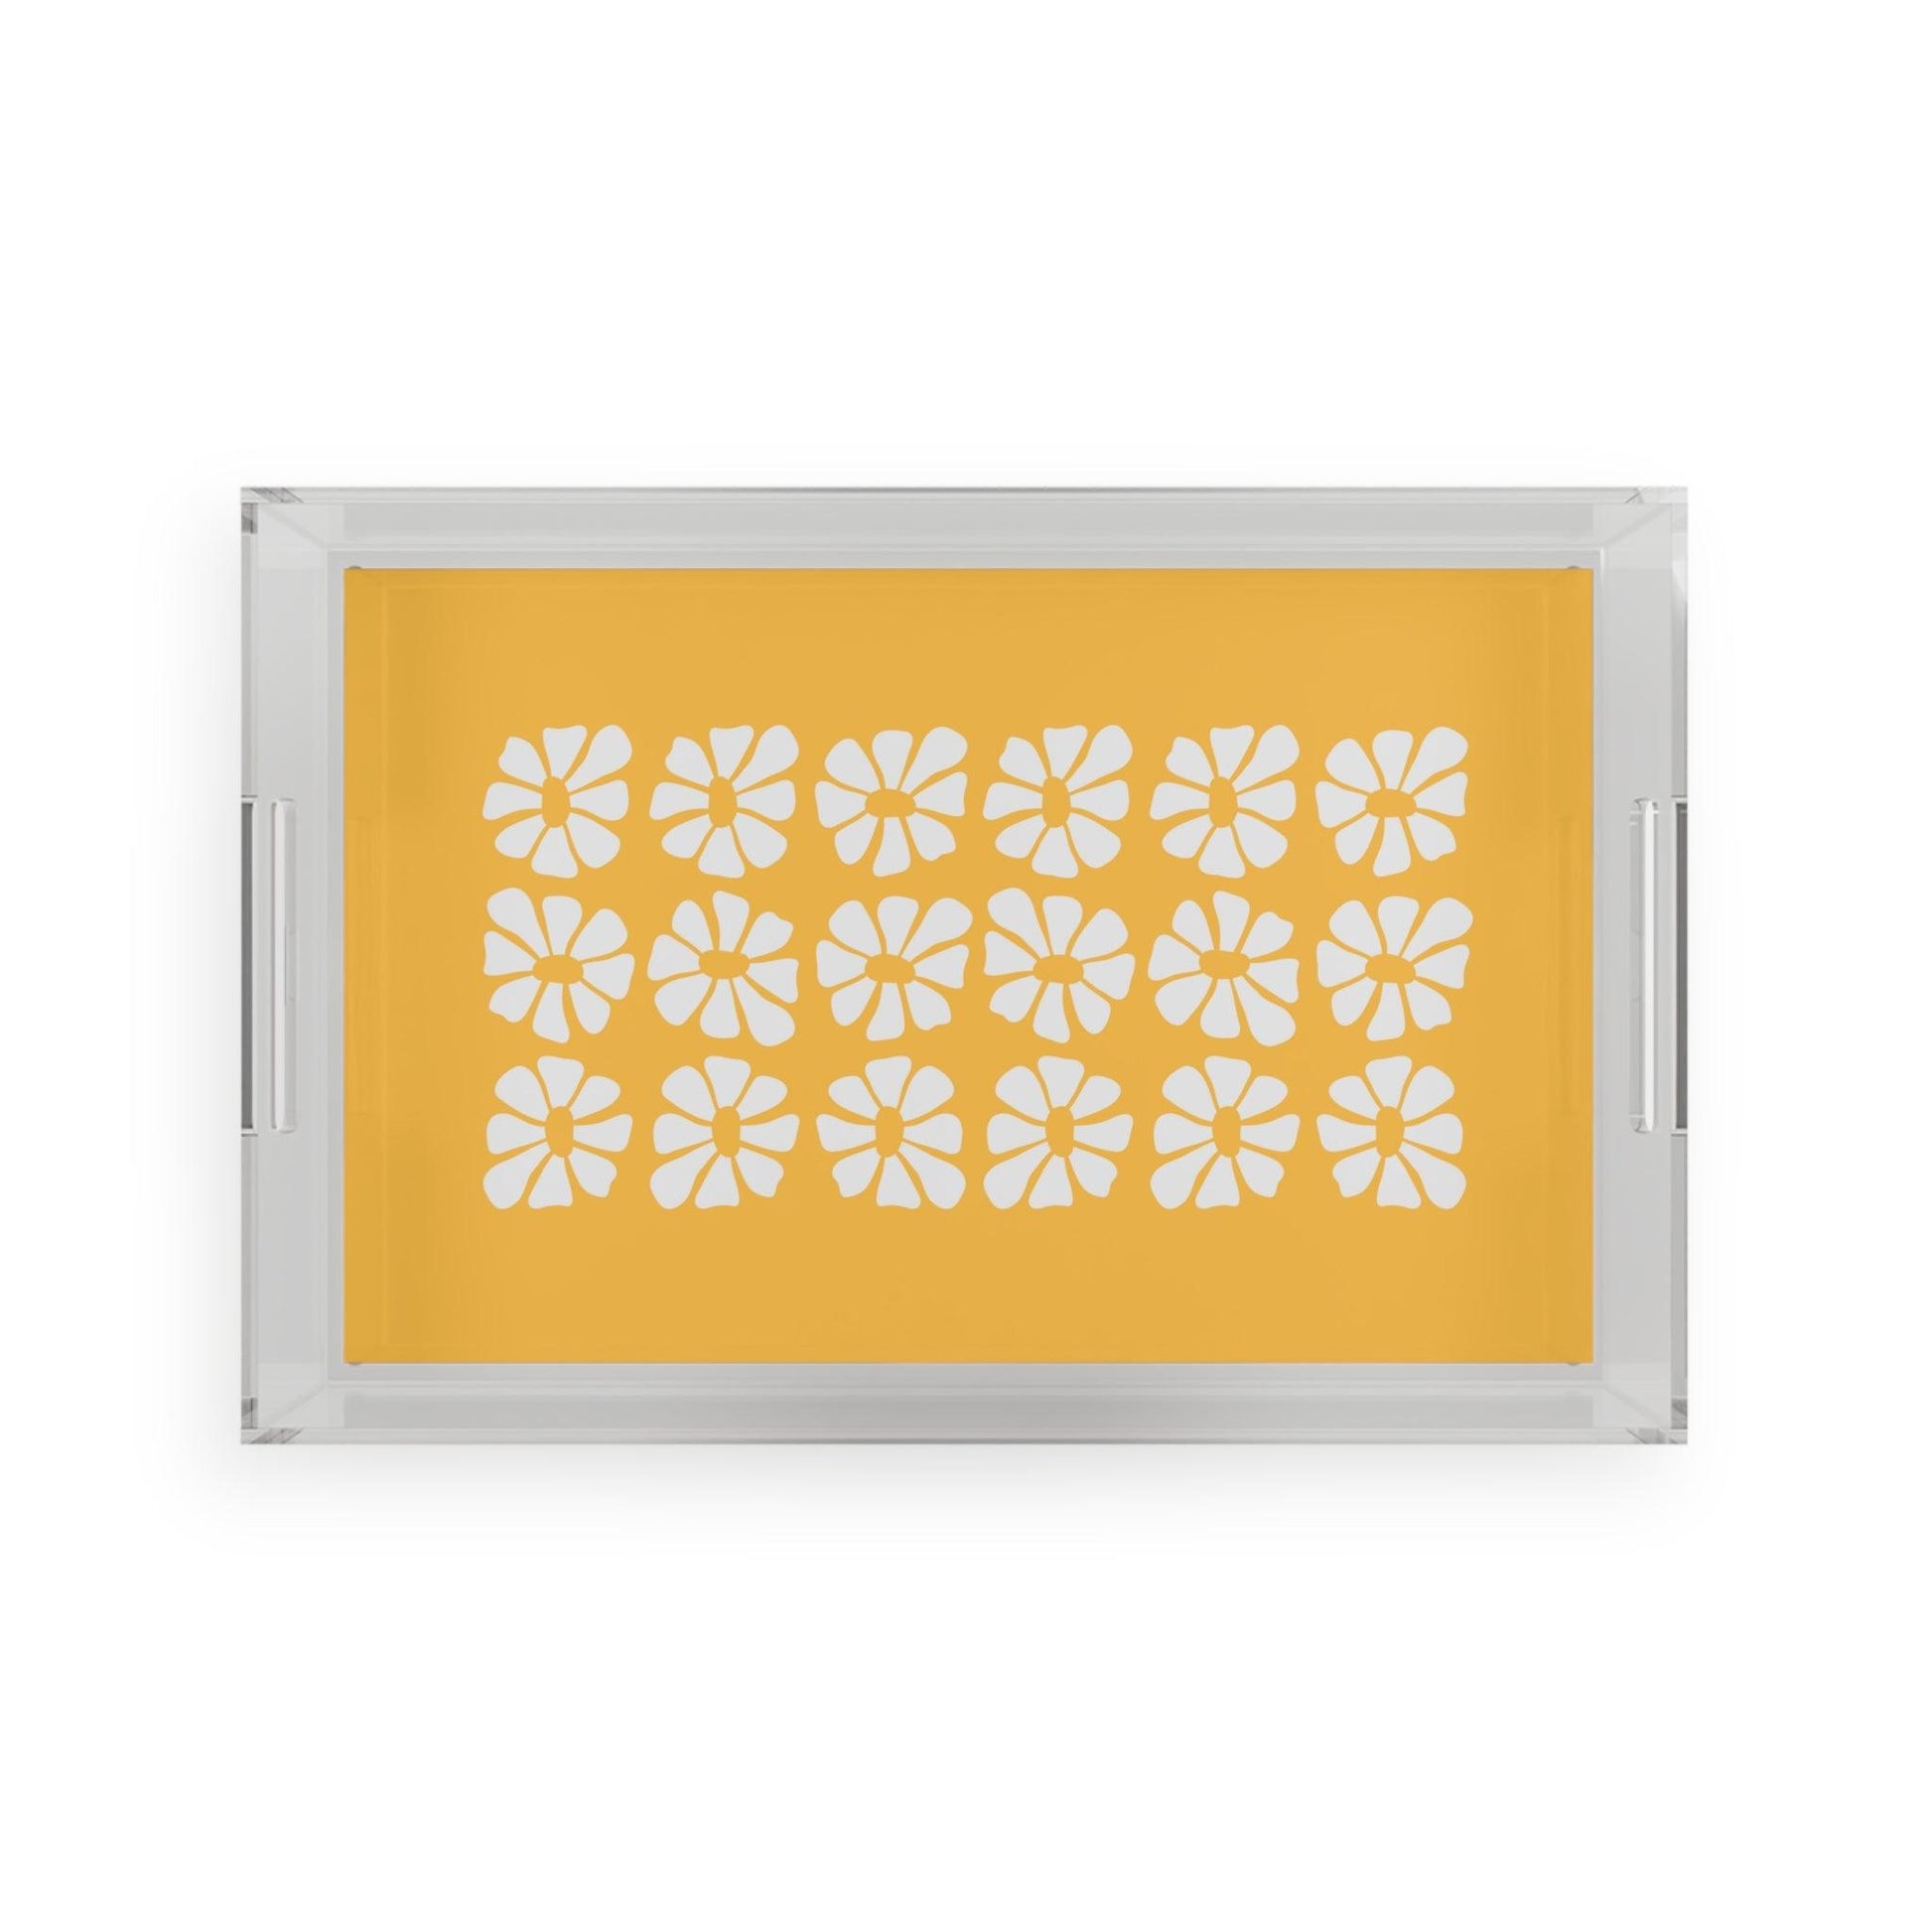 Flower Power Yellow Acrylic Serving Tray - MAIA HOMES